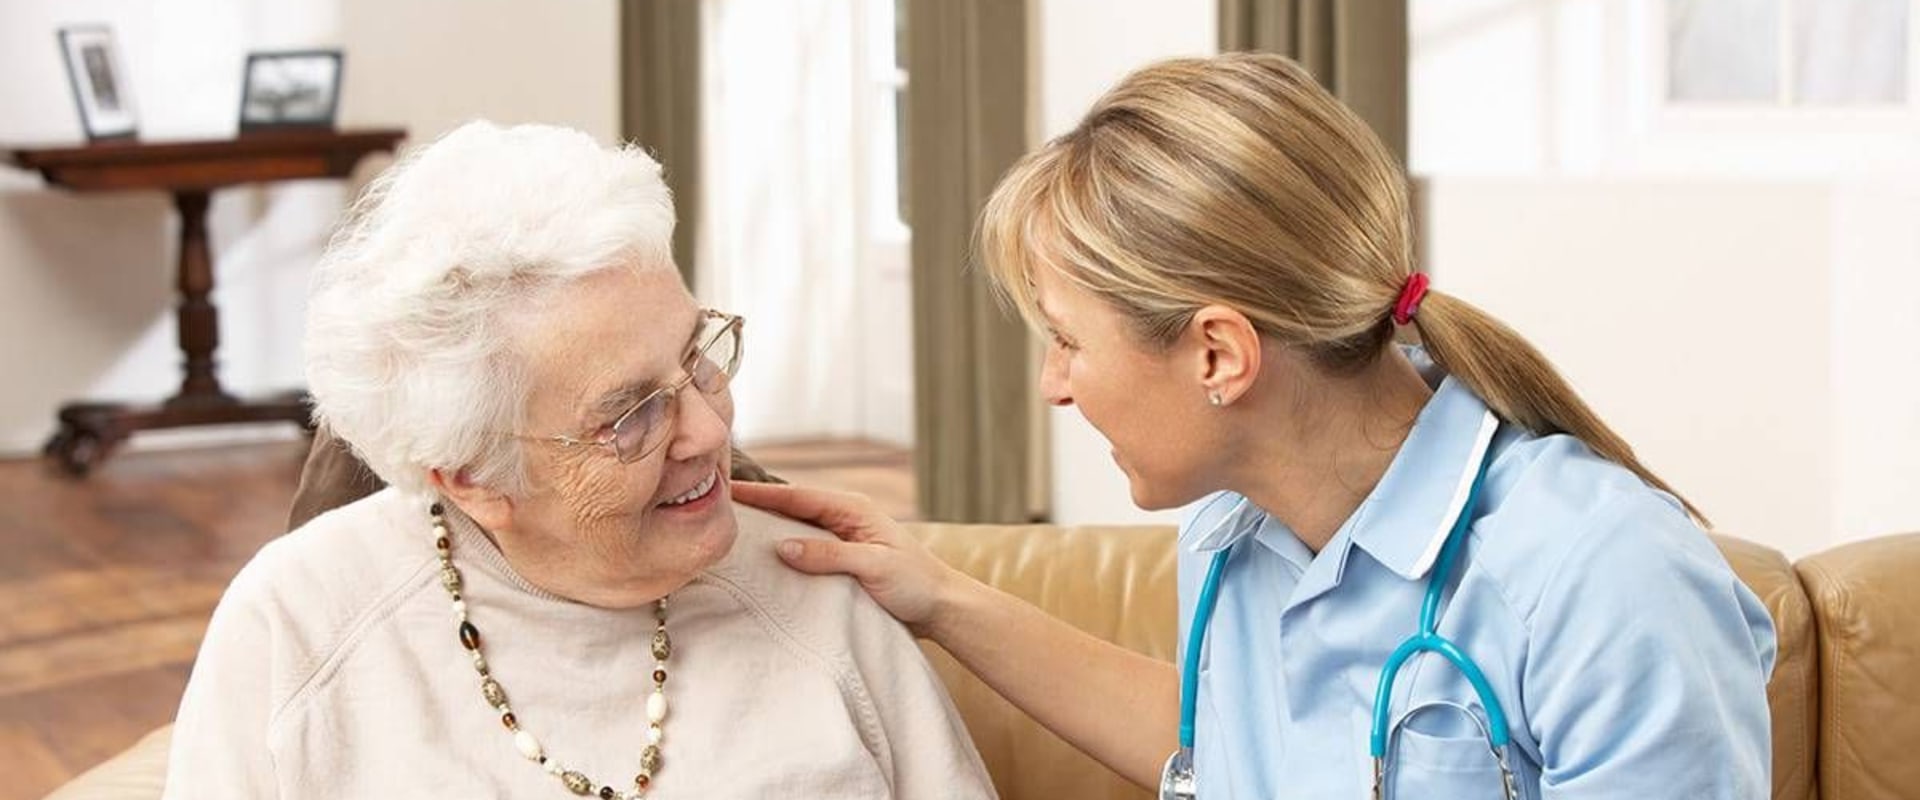 Understanding Coverage and Benefits for Assisted Living and Medicare/Medicaid